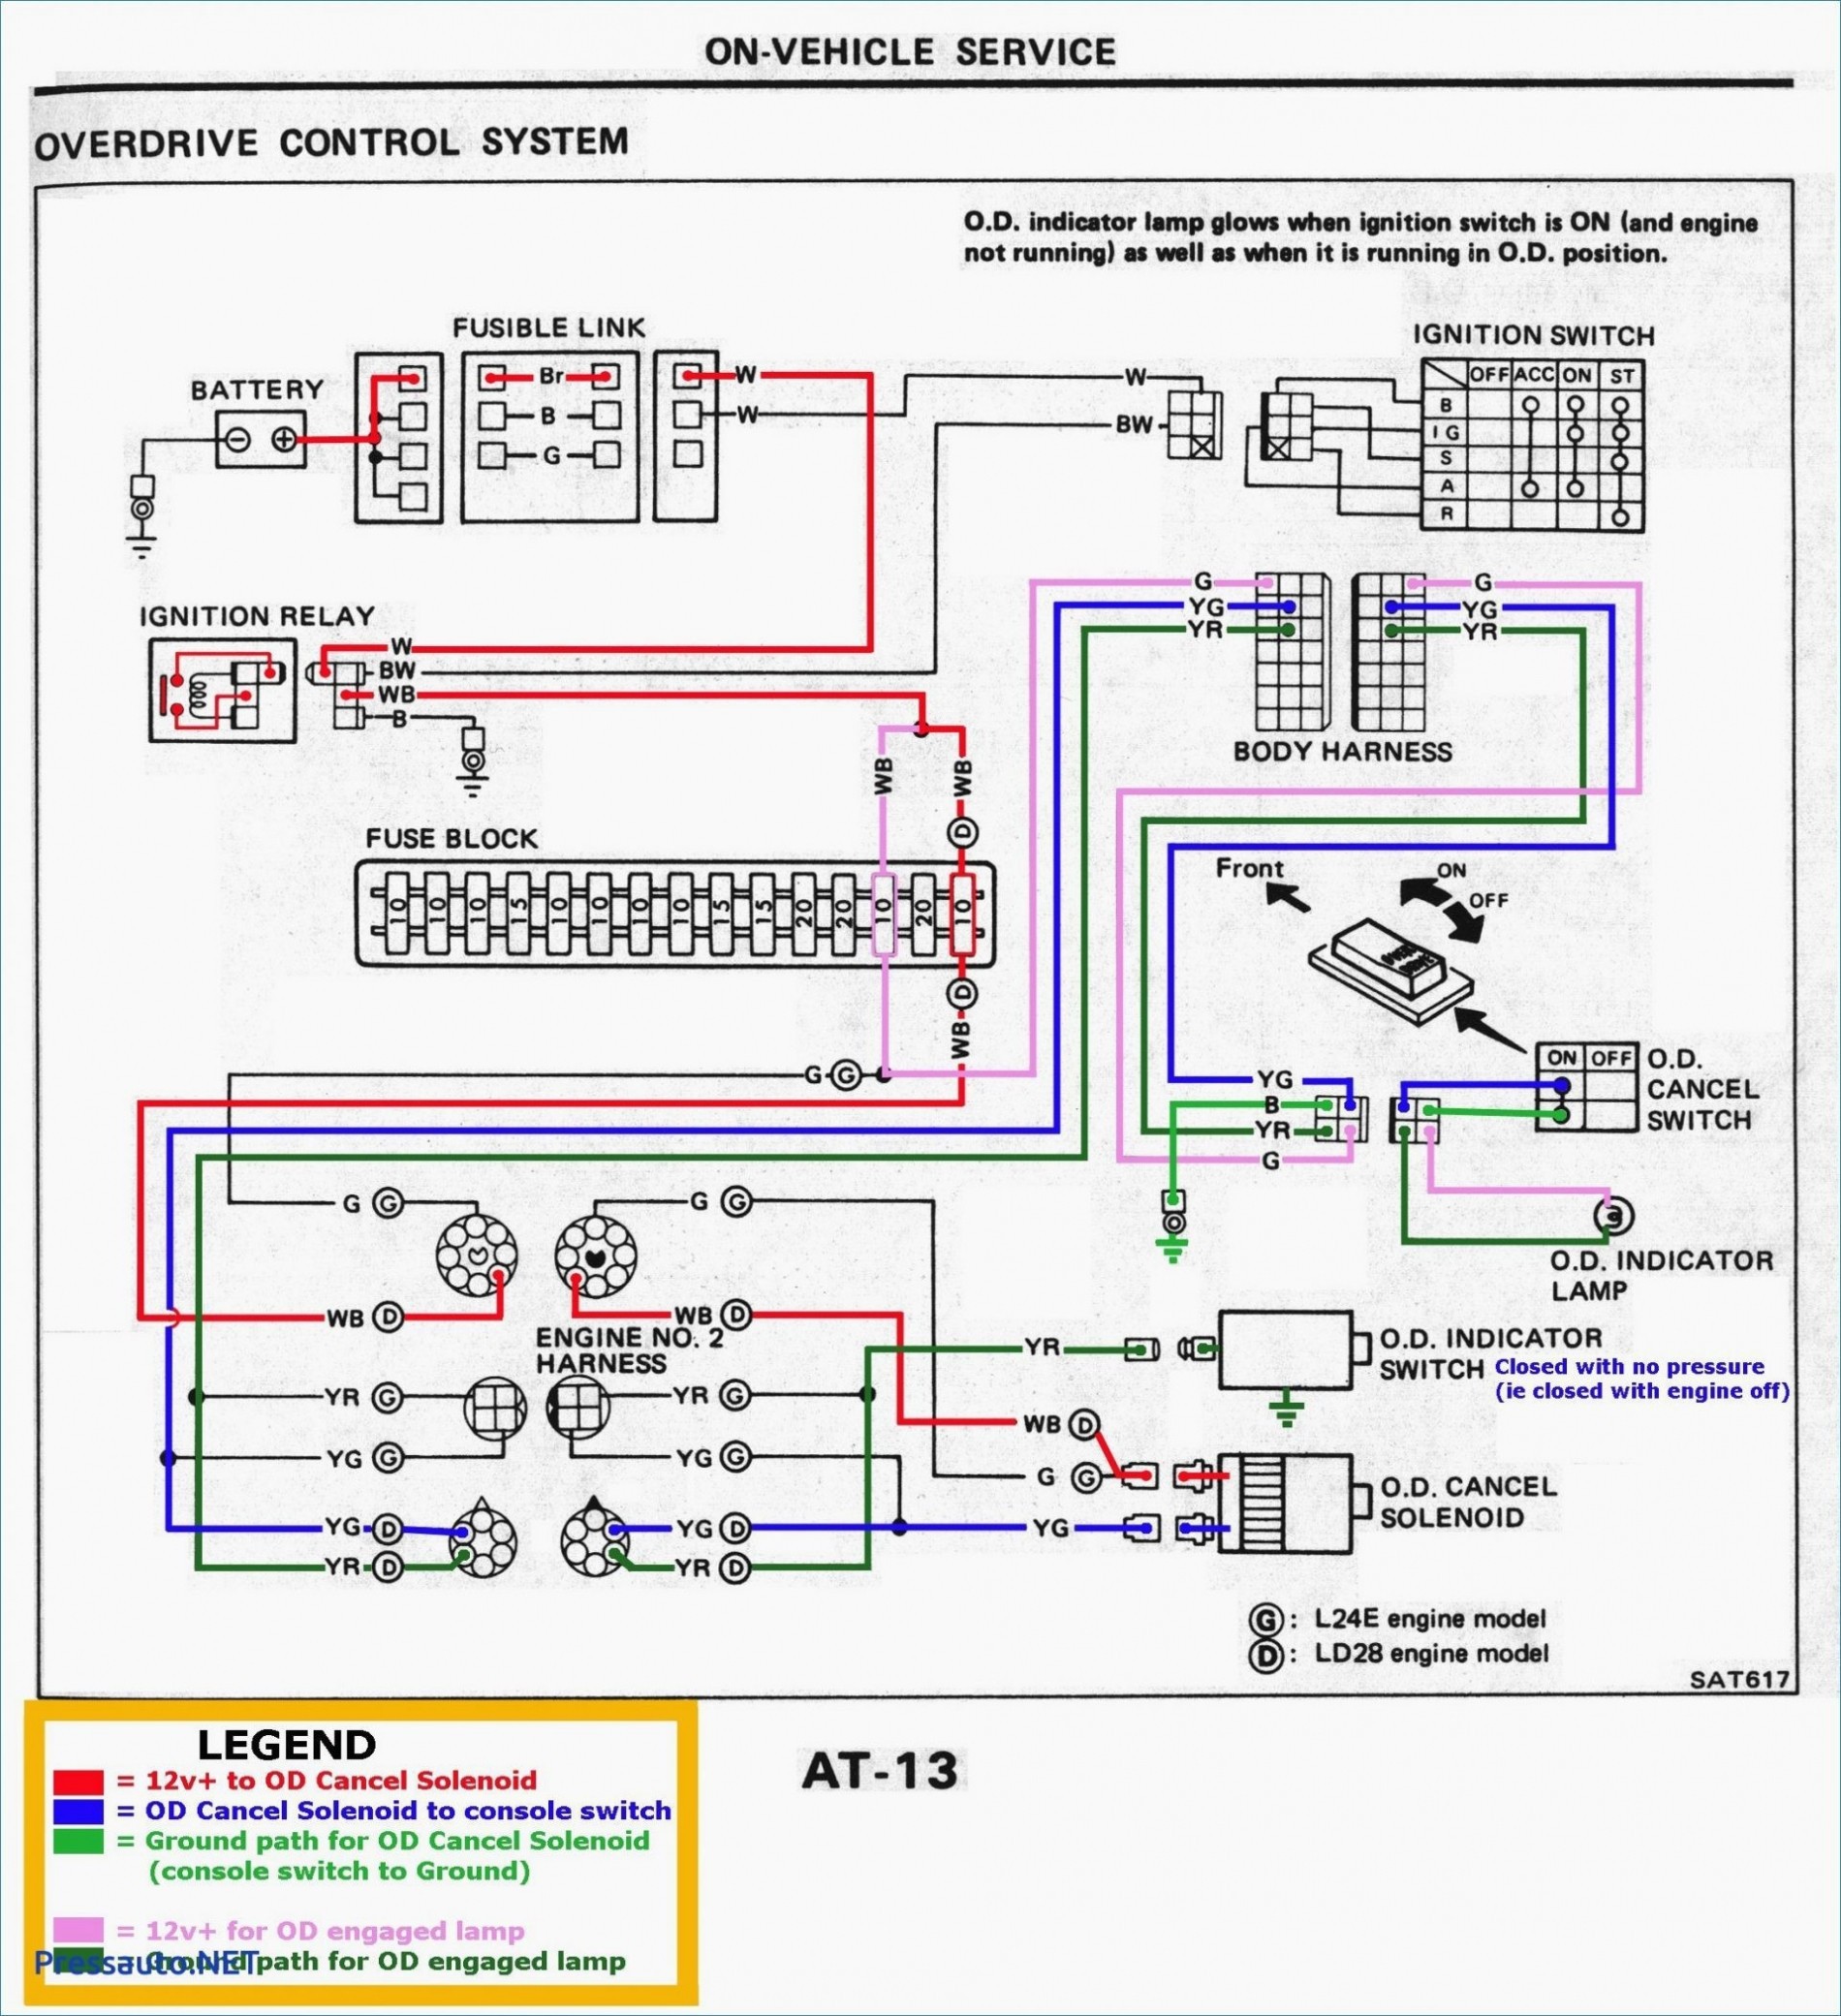 Car Speaker Wiring Diagram How to Wire Car Speakers to Amp Diagram Valid 2 Channel Amp Wiring Of Car Speaker Wiring Diagram